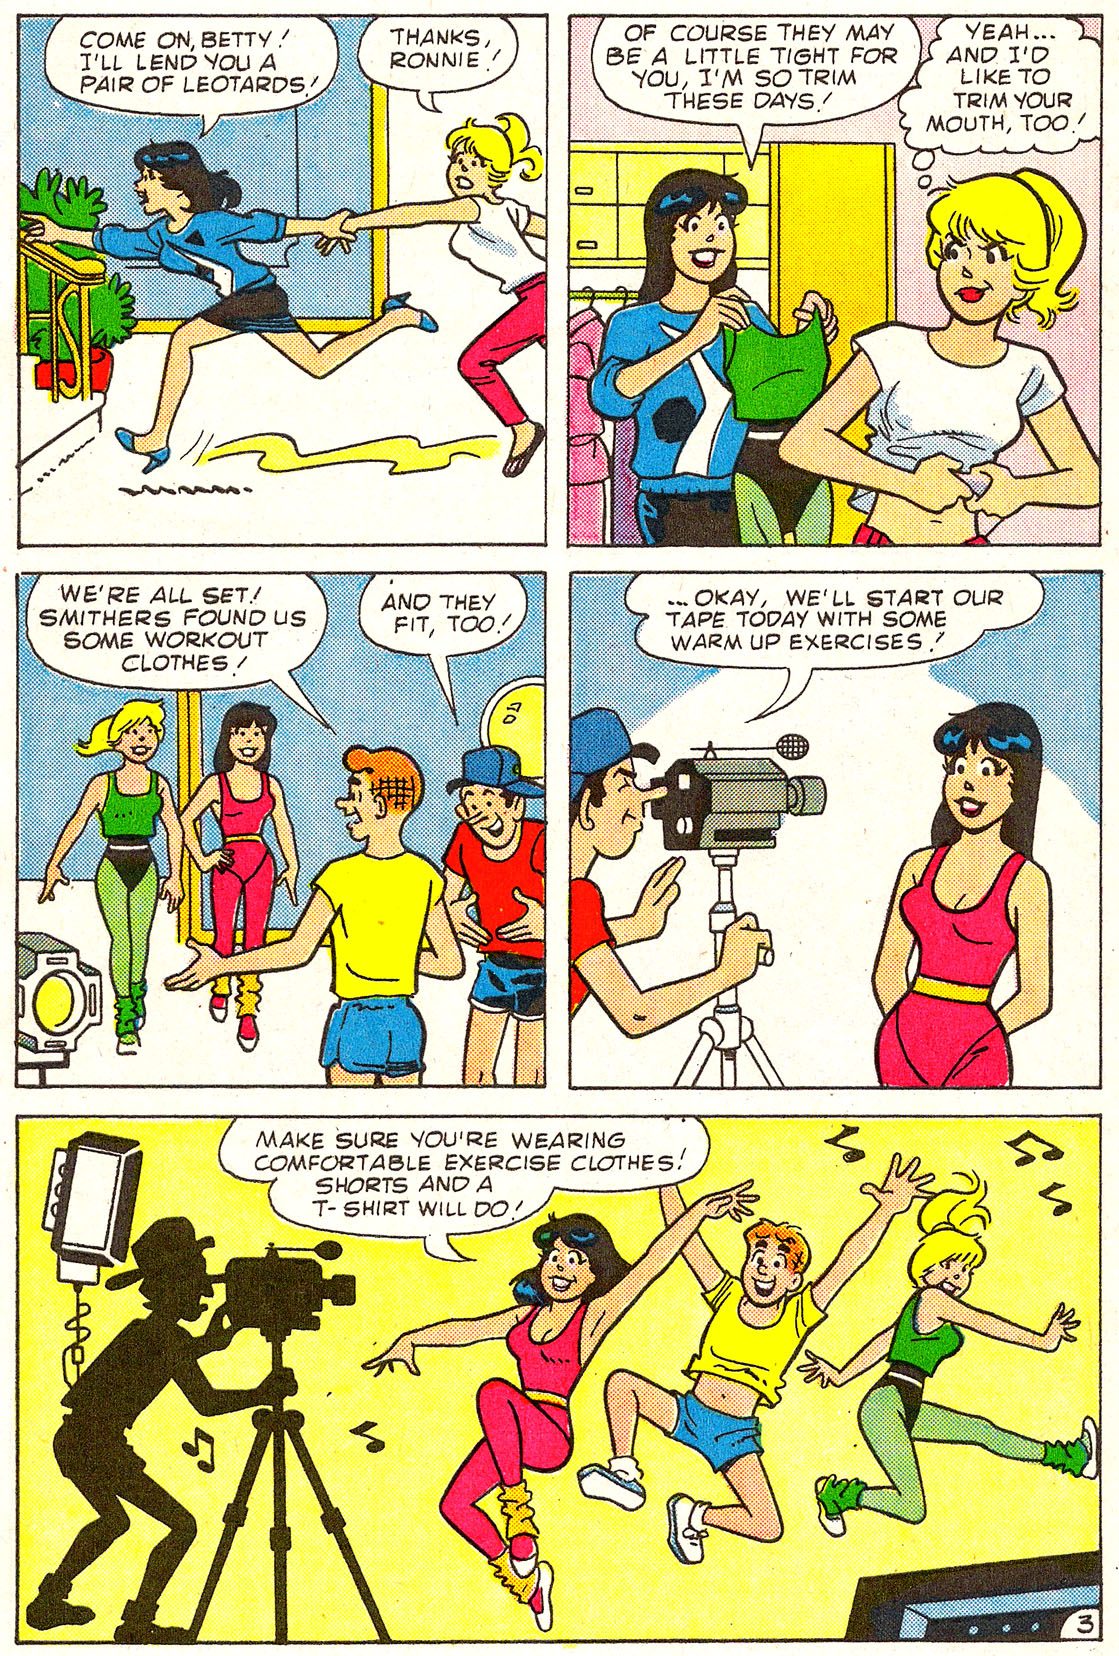 Read online Archie's Girls Betty and Veronica comic -  Issue #345 - 29